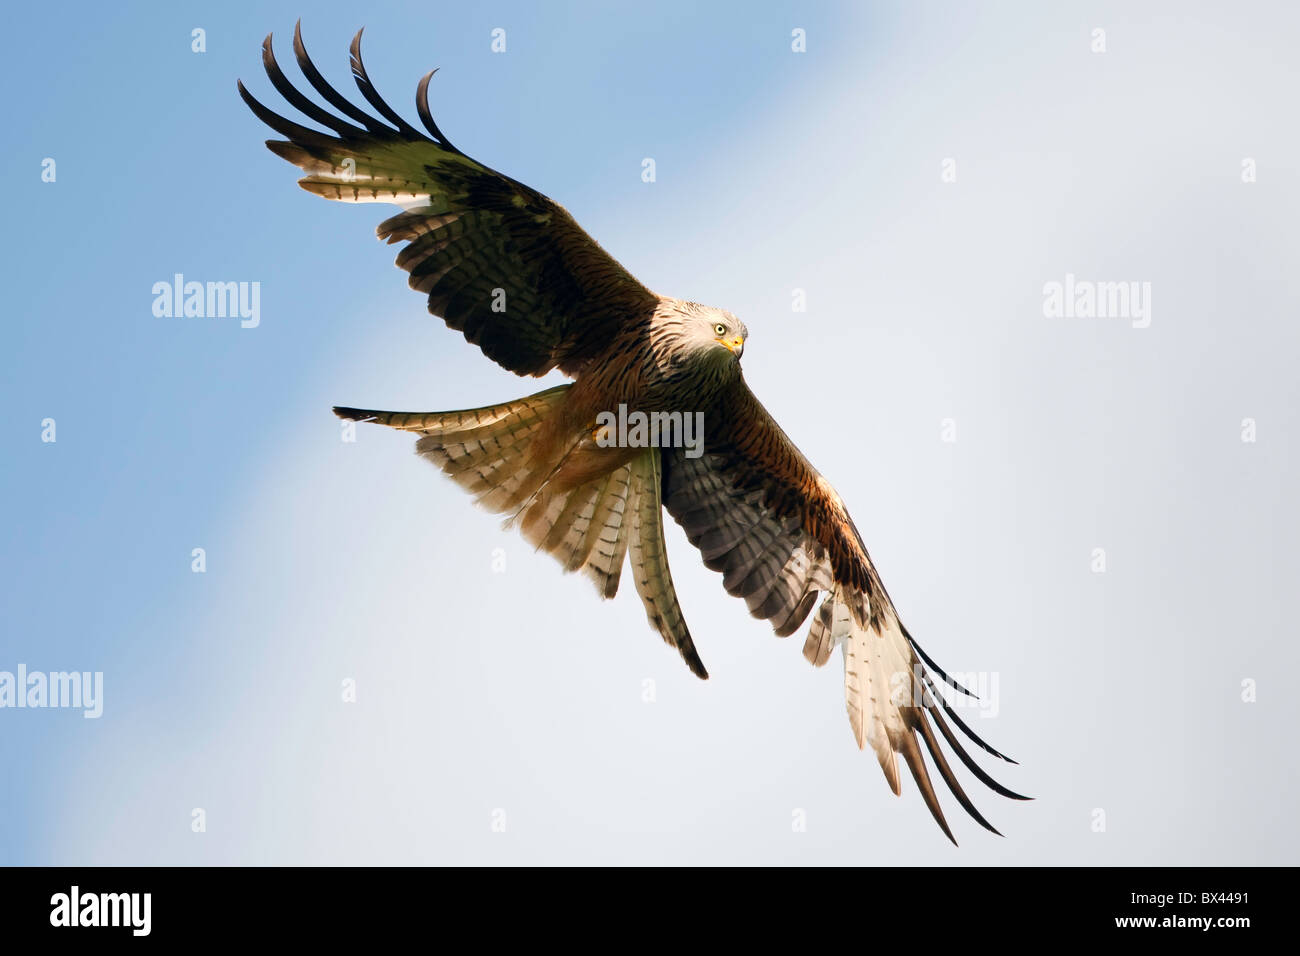 Red kite in flight against cloudy blue sky. Stock Photo